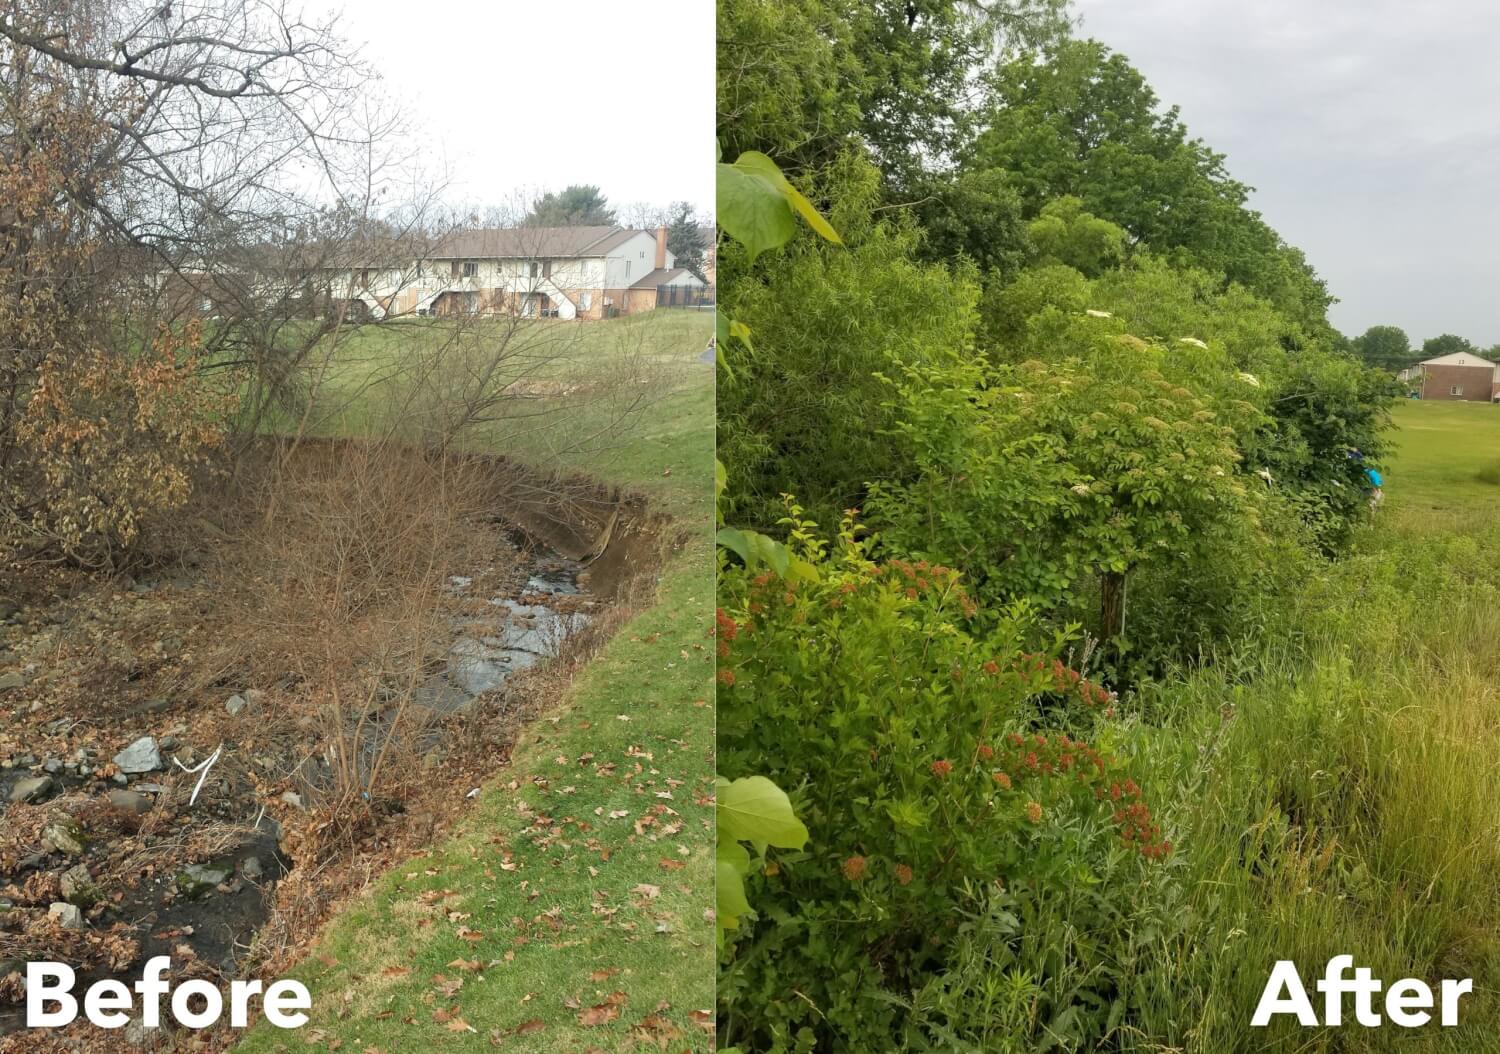 Image depicting the results of riparian restoration efforts like planting native vegetation. On the left: "Before" photo of a stream bank that is tightly mowed. Vegetation is dead and the bank is eroding due to exposure. On the right: "After" photo of the same stream bank after restoration efforts. Vegetation and grasses are lush and green. The stream bank is well guarded from erosion.